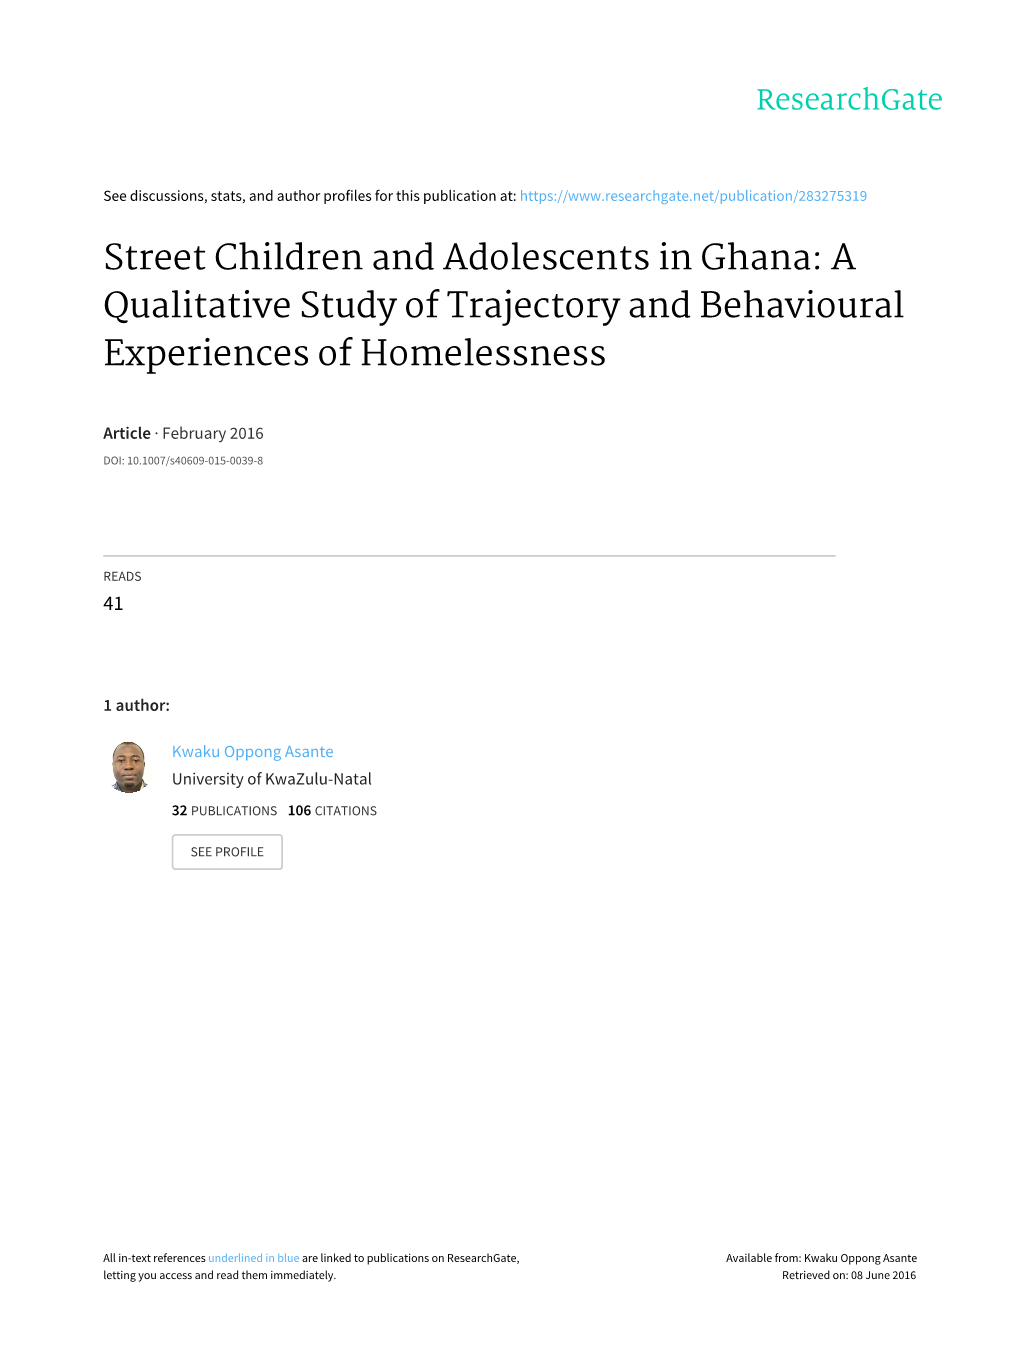 Street Children and Adolescents in Ghana: a Qualitative Study of Trajectory and Behavioural Experiences of Homelessness